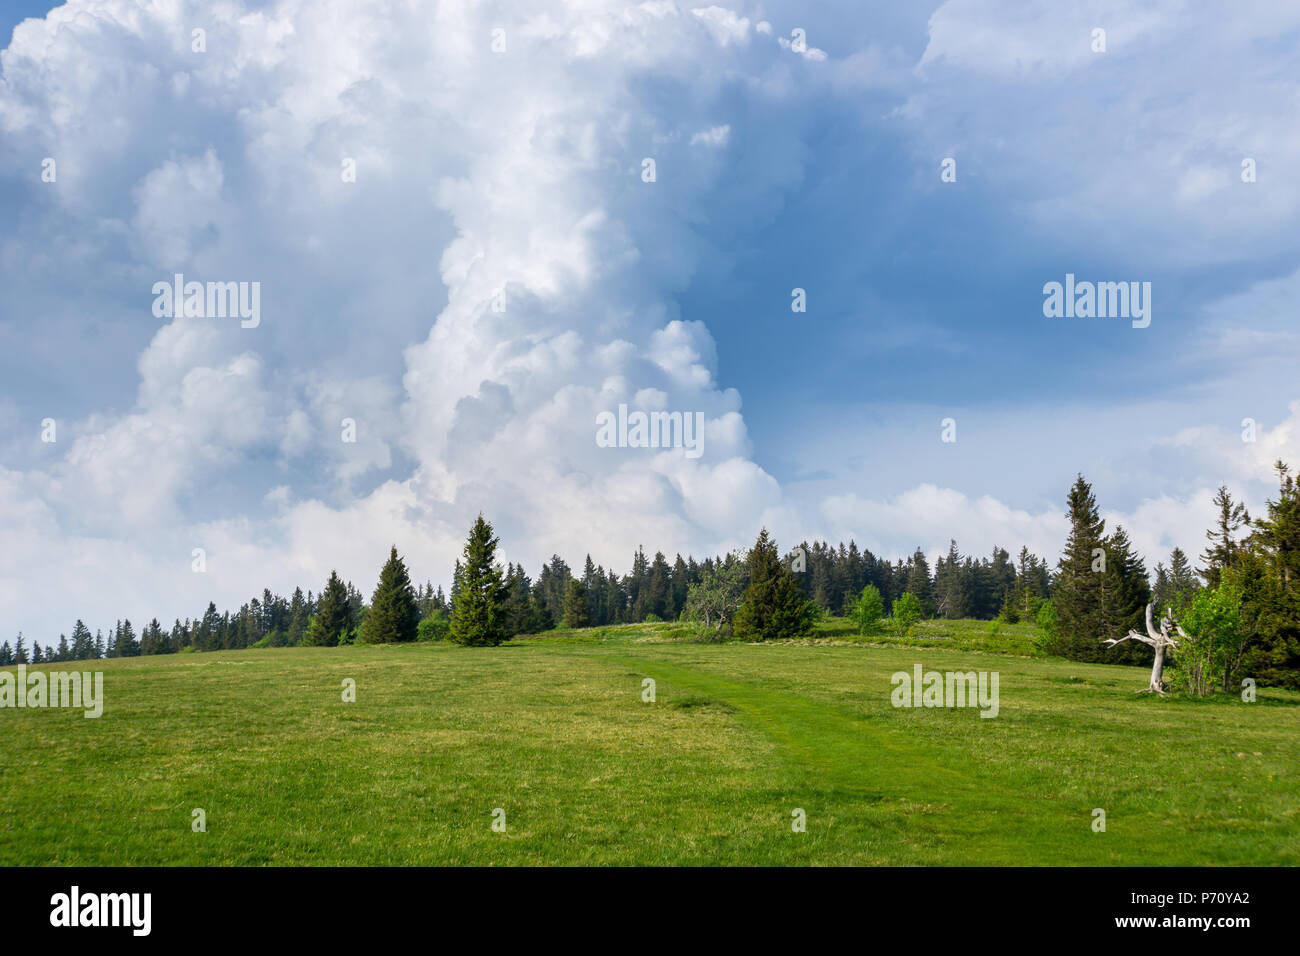 Germany, Dramatic sky of thunderstorm cloud formations over black forest nature landscape Stock Photo